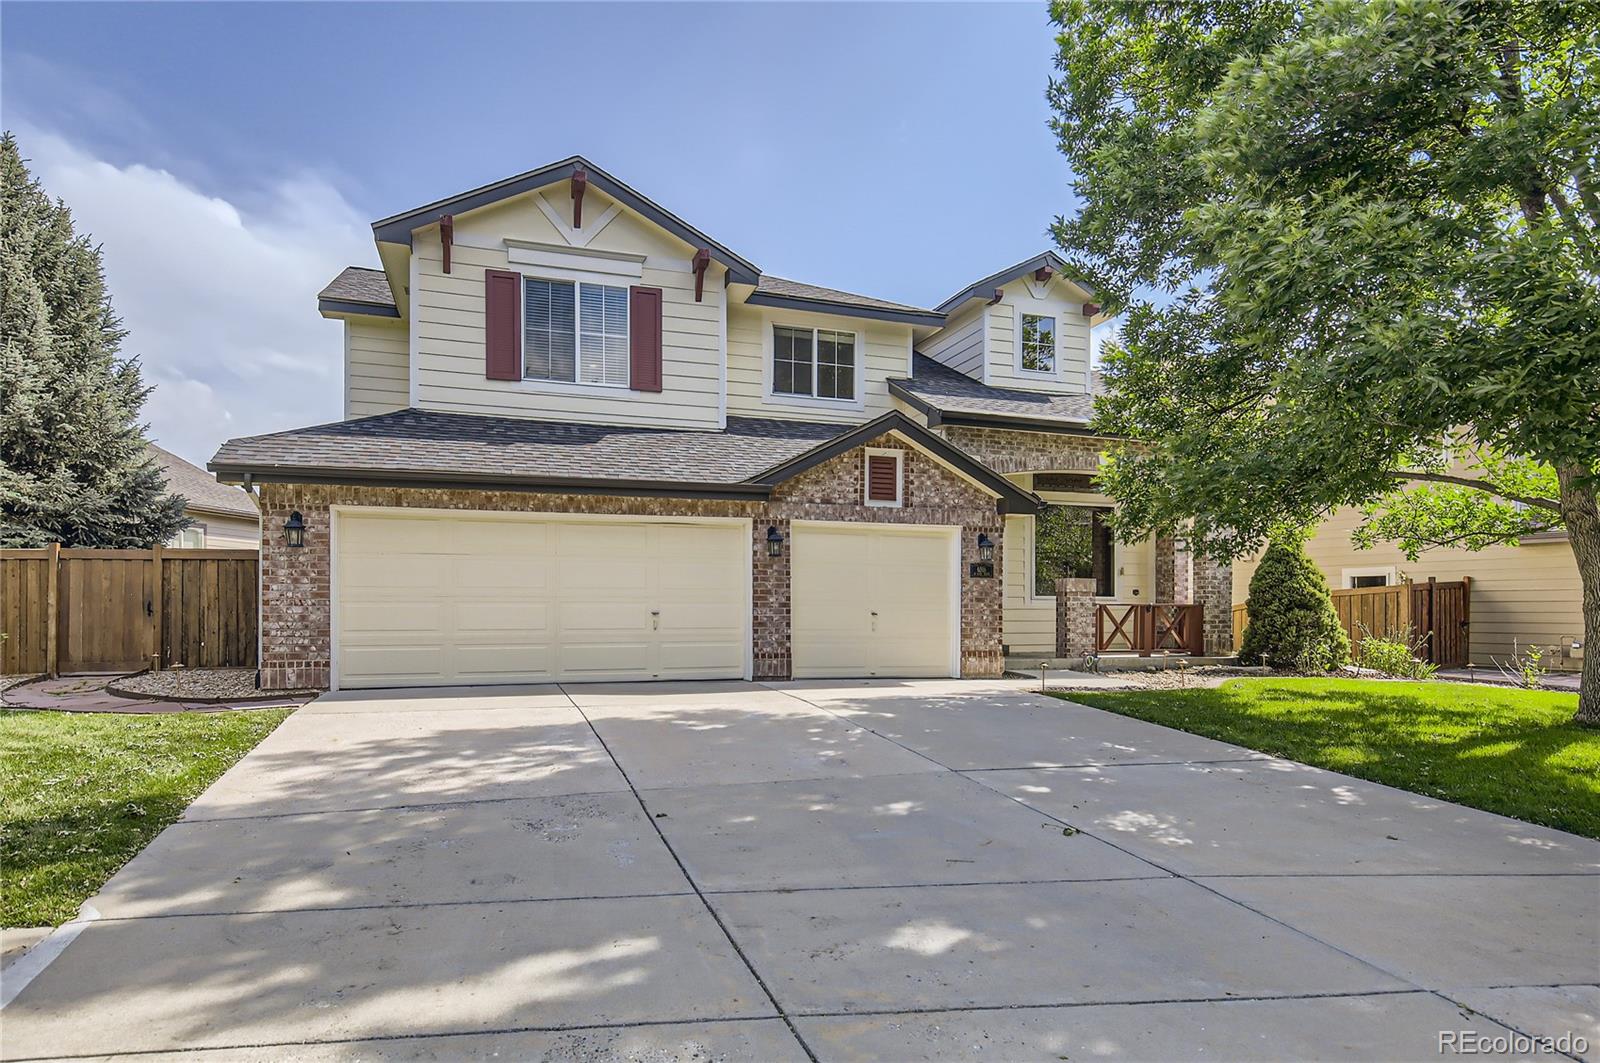 Report Image for 6516 W Long Drive,Littleton, Colorado